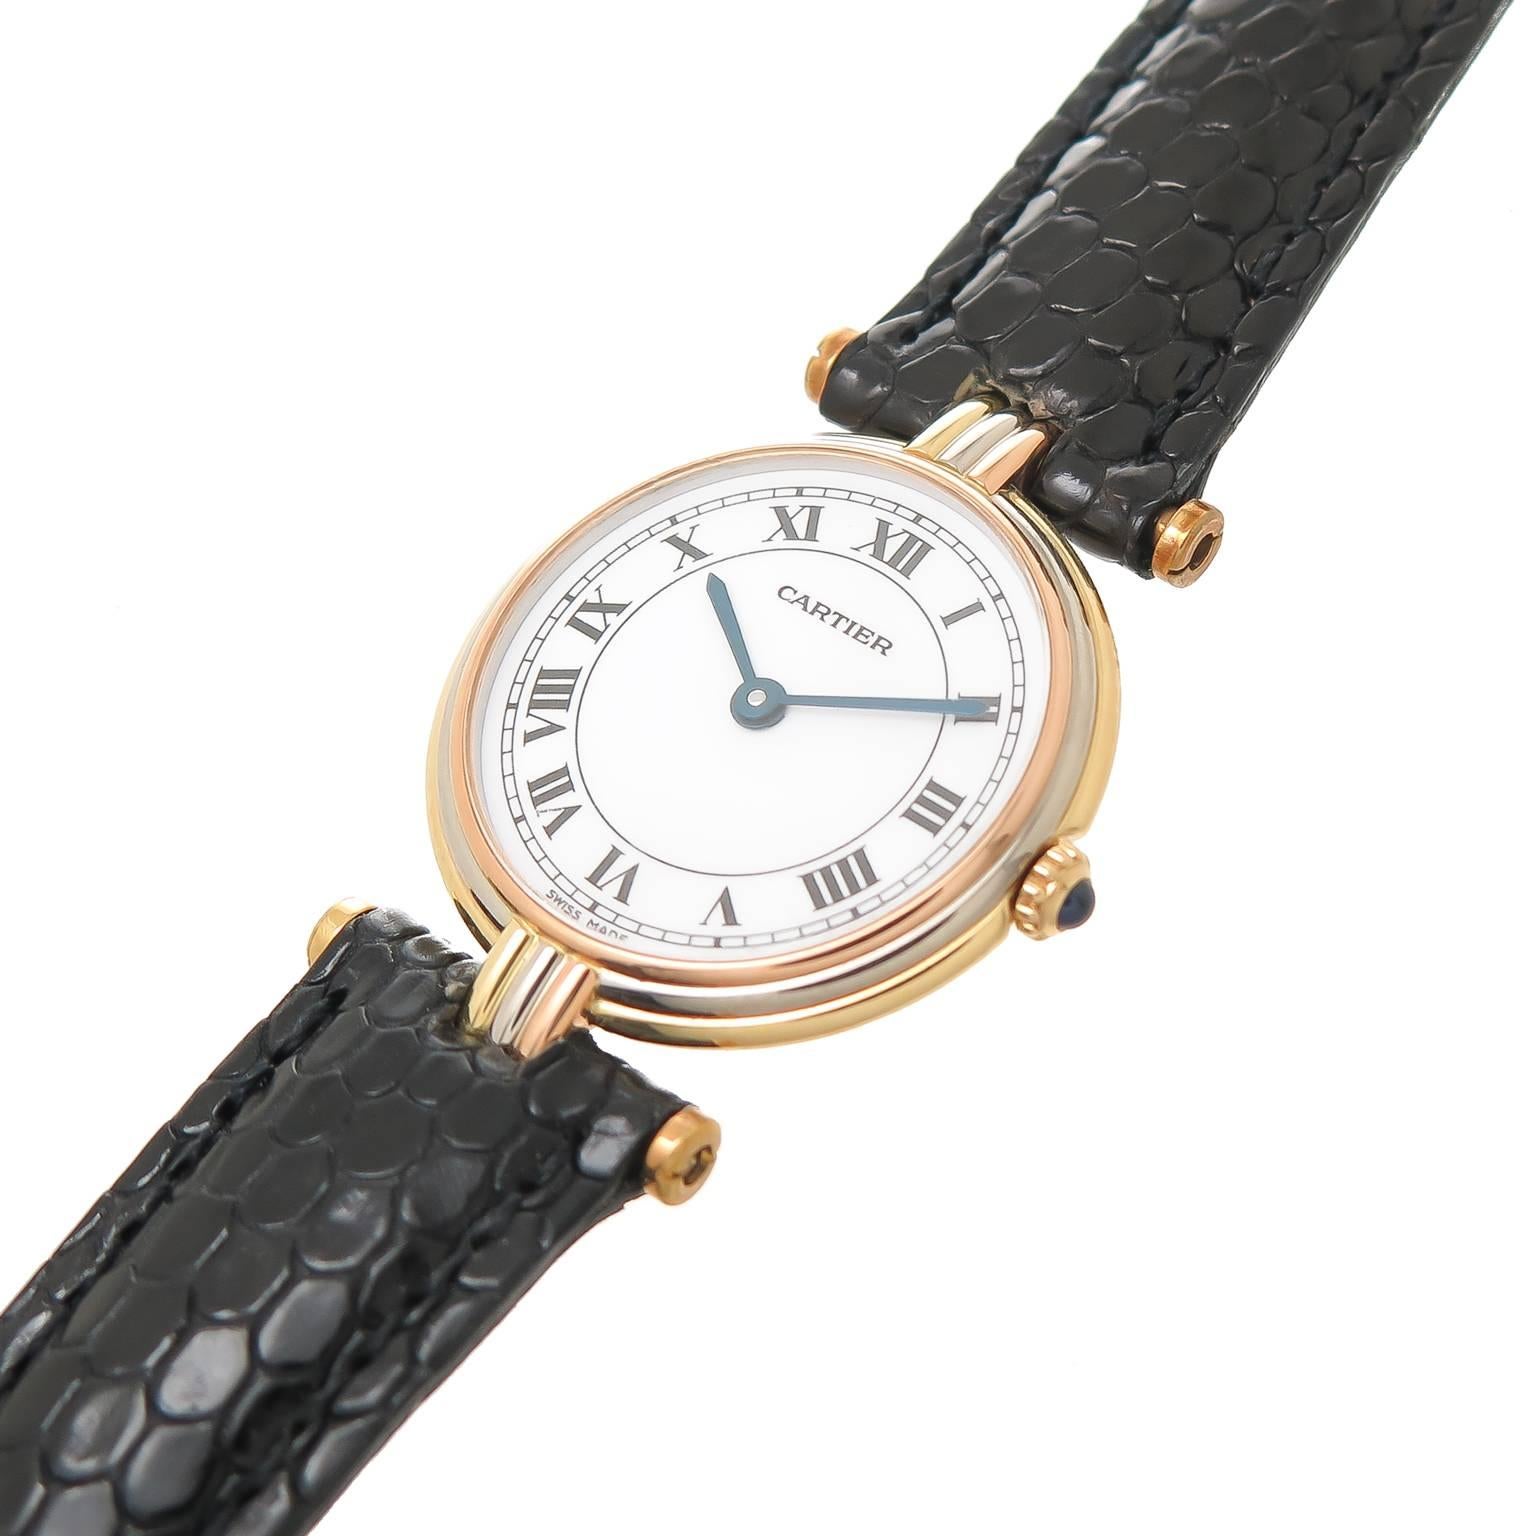 Circa 1990 Cartier 18K Yellow, White and Rose Gold Vendome Ladies Wrist Watch. 25 MM water resistant stepped case, Quartz Movement, White Dial with Black Roman Numerals, Sapphire Crown. New Black lizard Lizard Strap with Cartier gold plate tang